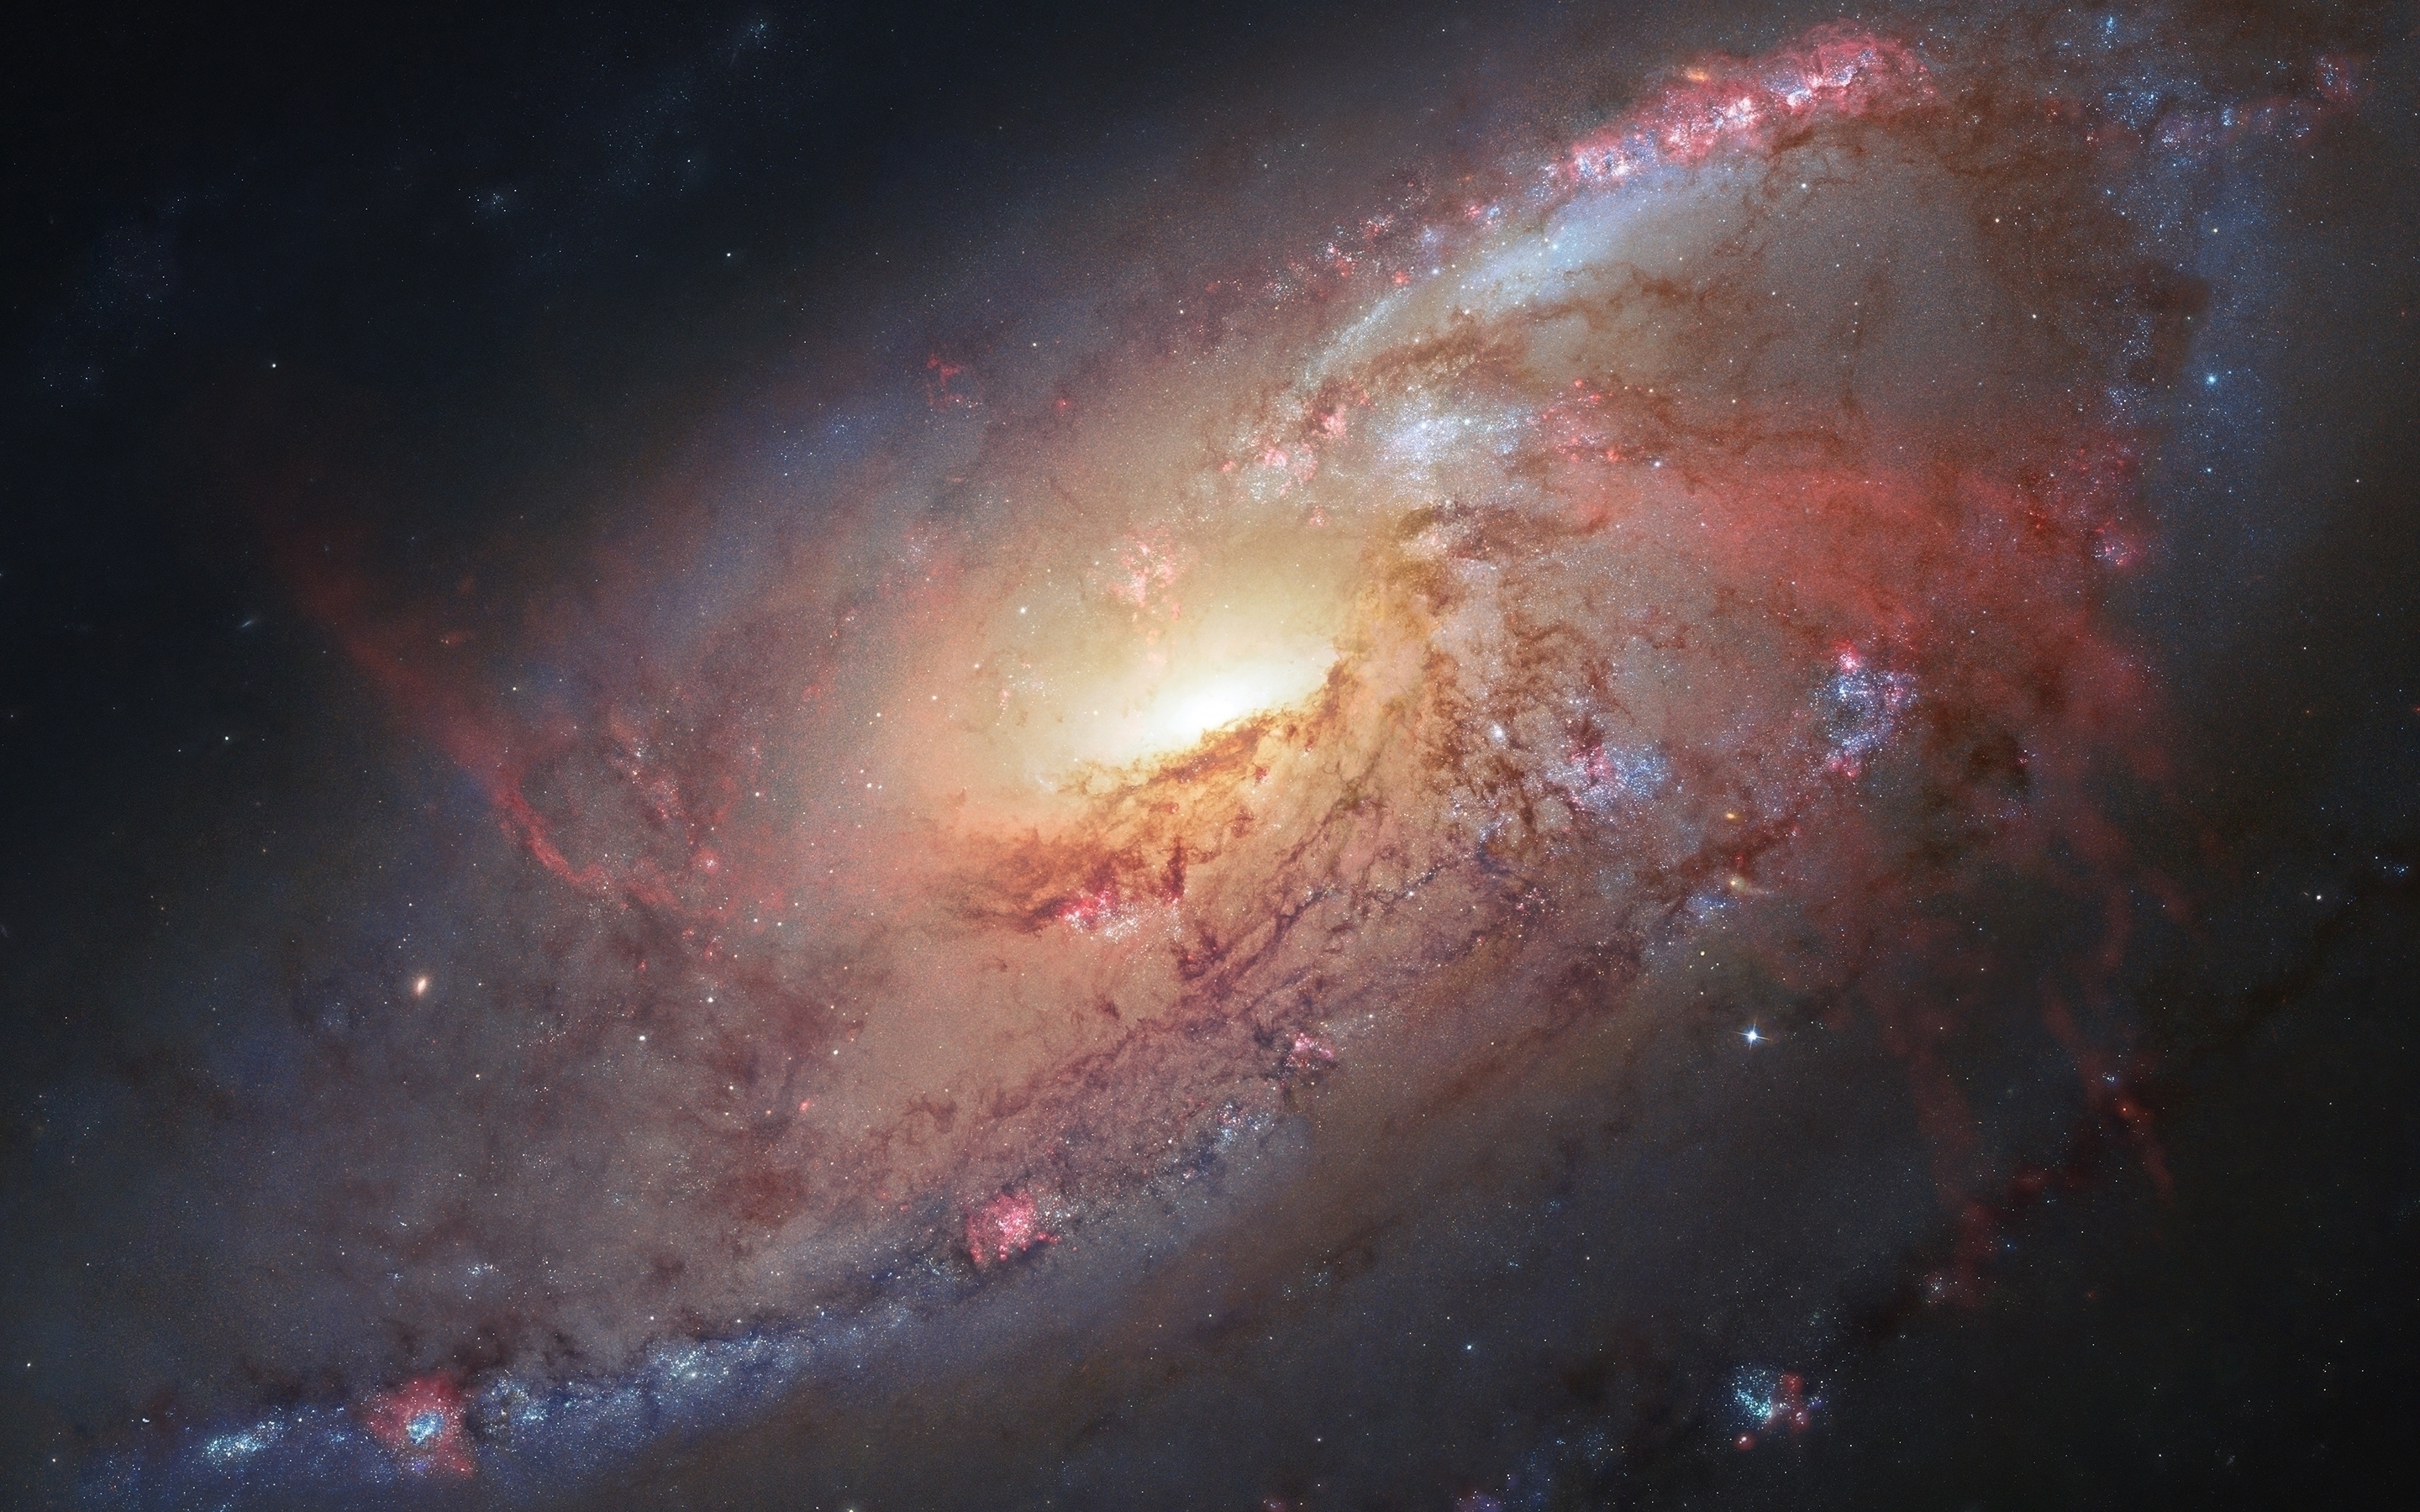 Hubble 4K wallpaper for your desktop or mobile screen free and easy to download